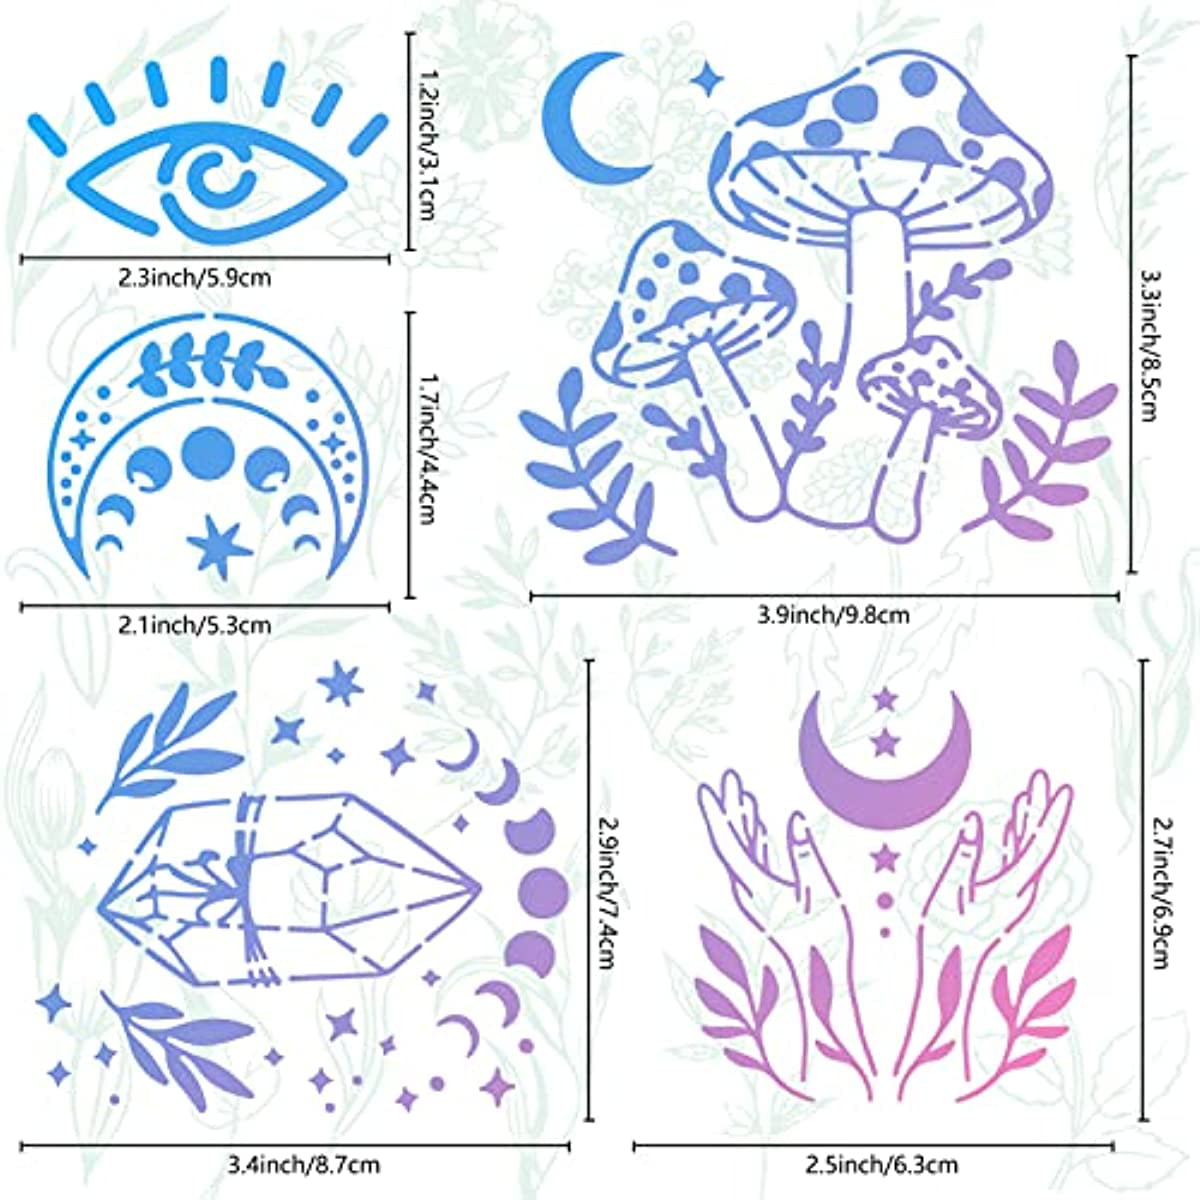 Wholesale GORGECRAFT 6.3 Inch Metal Runes Stencil Stainless Steel Wood  Burning Stencils and Patterns Reusable Templates Journal Tool for Painting  Engraving Crafts 